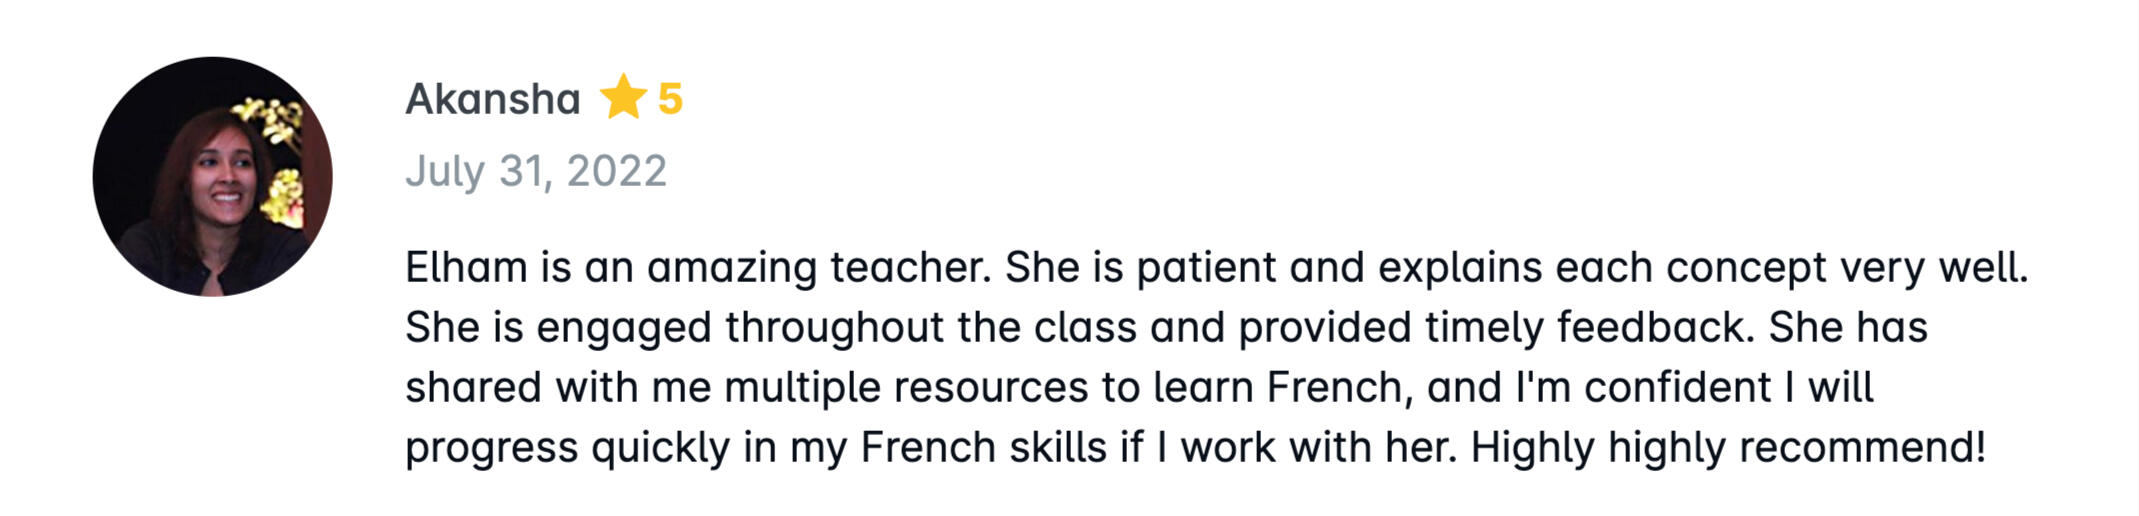 Elham is an amazing teacher. She is patient and explains each concept very well. She is engaged throughout the class and provided timely feedback. She has shared with me multiple resources to learn French, and I&#39;m confident I will progress quickly in my Fr